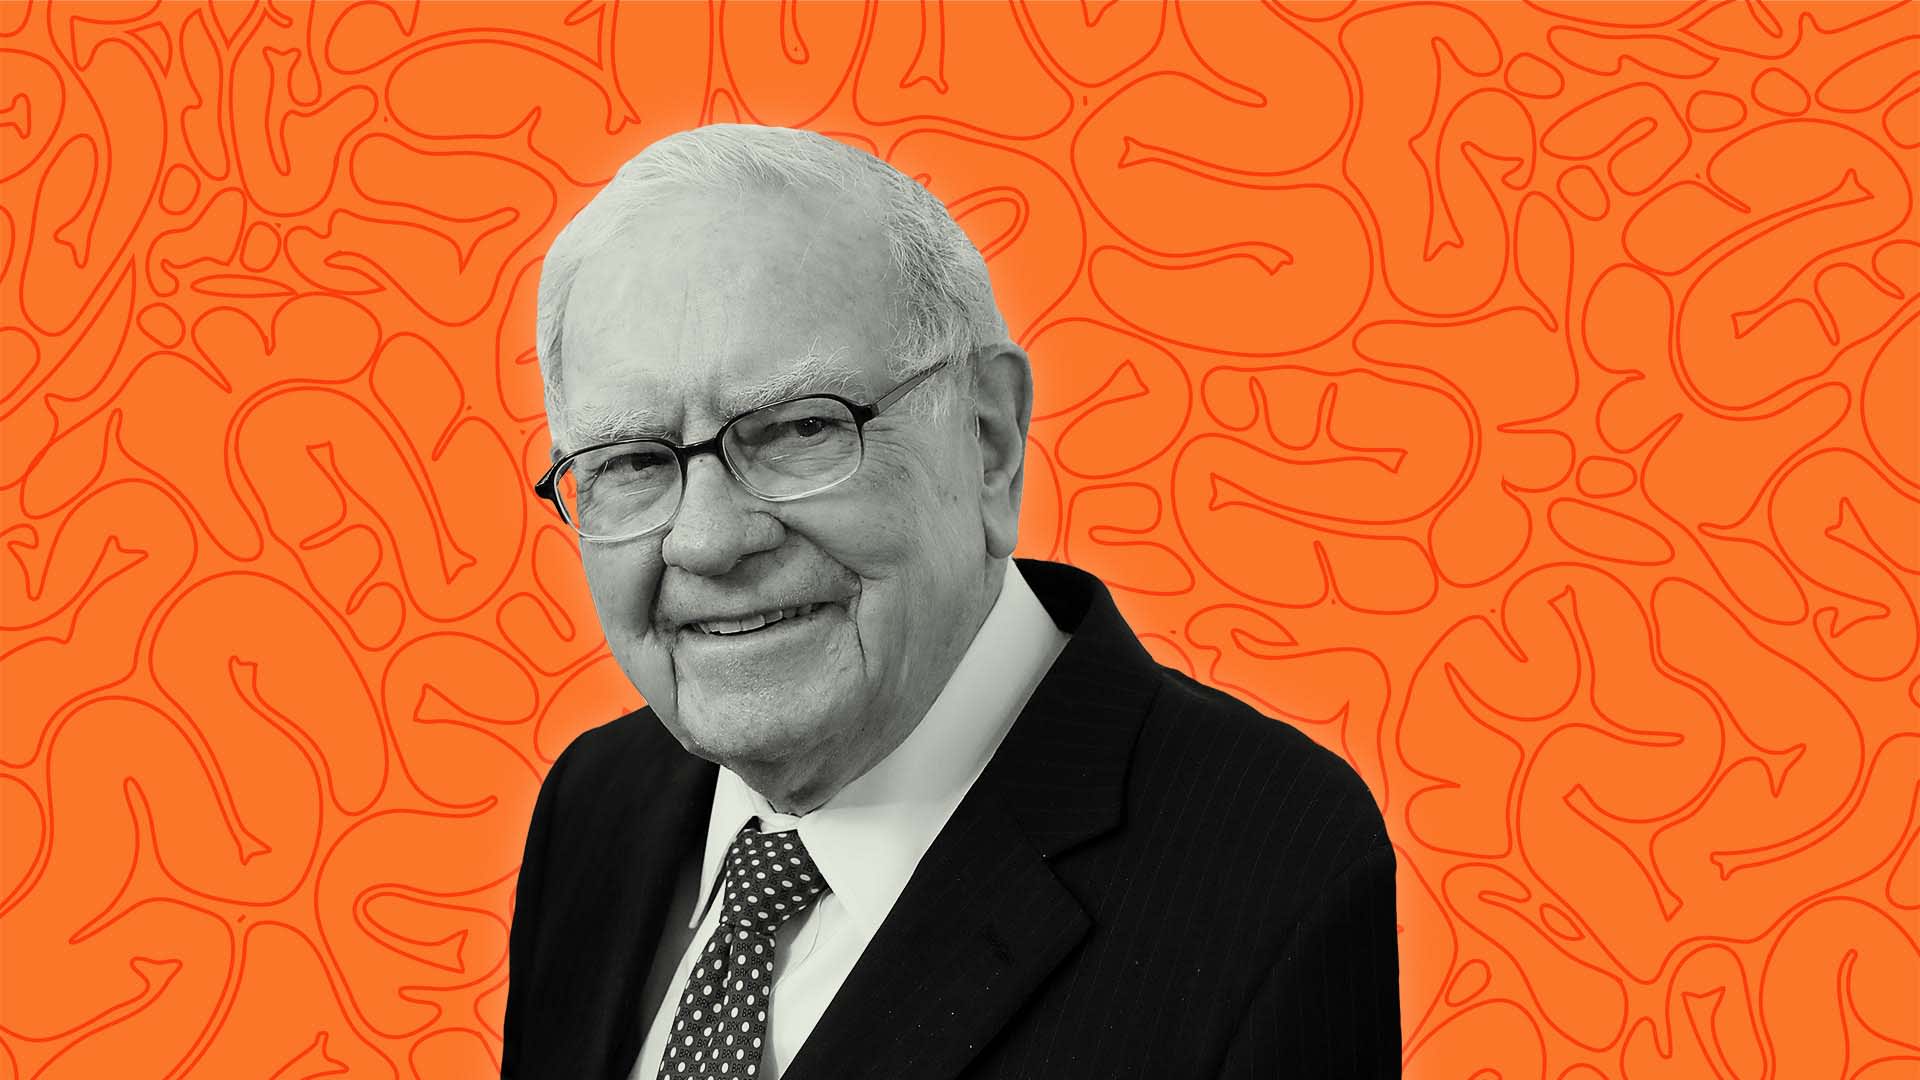 Warren Buffett Says You'll Be a Wreck If You Don't Take Care of Your Mental Health. Here Are 8 Proven Ways to Do It